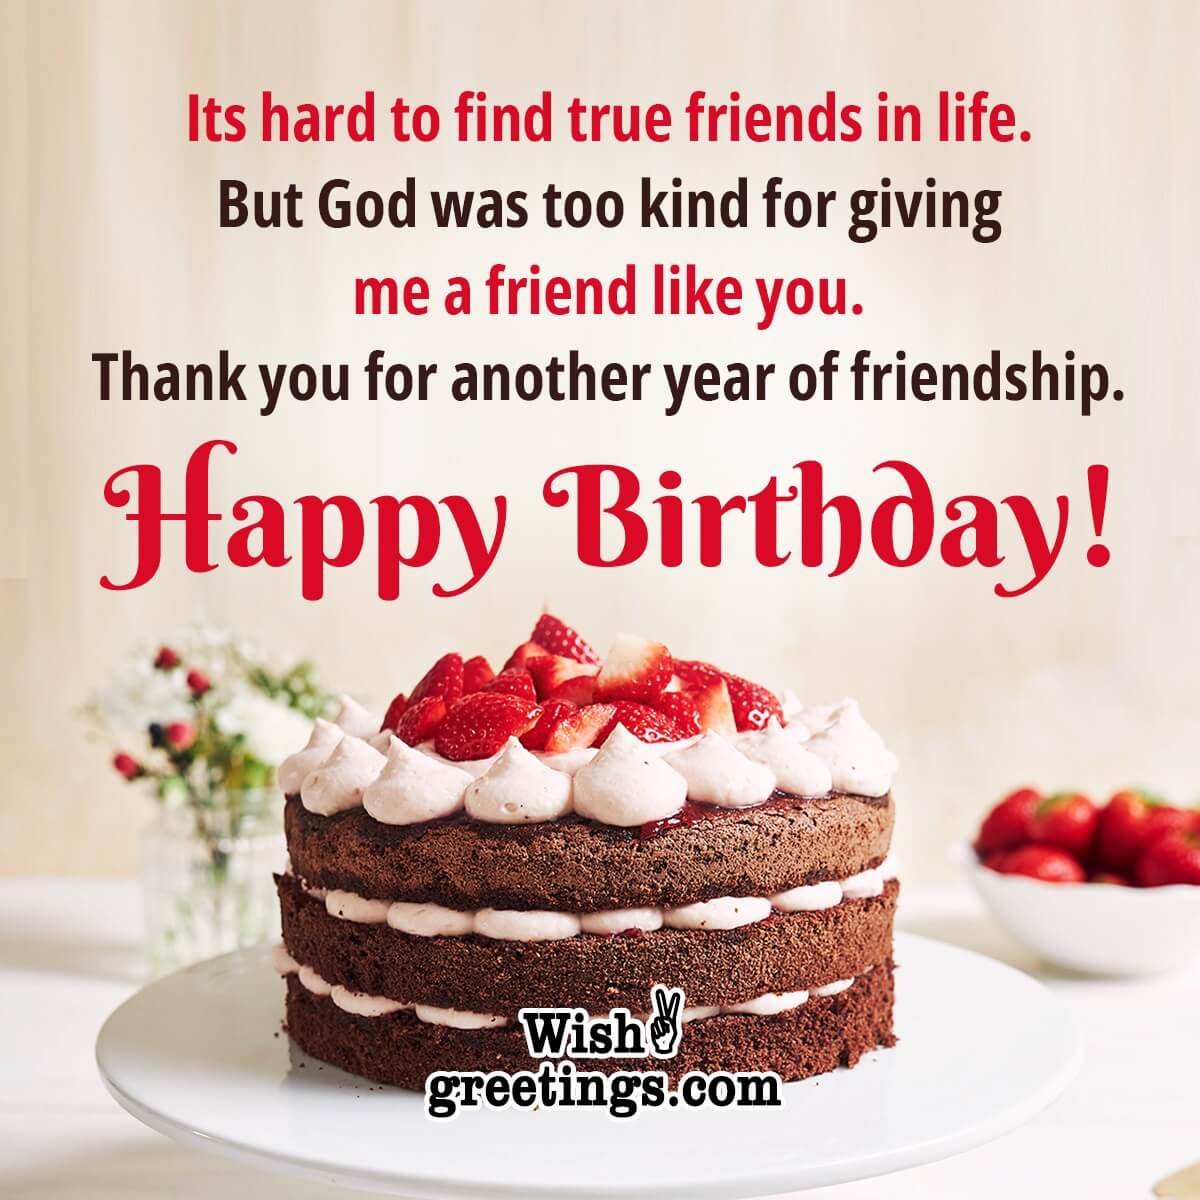 Best Happy Birthday Messages for Friends Wish Greetings